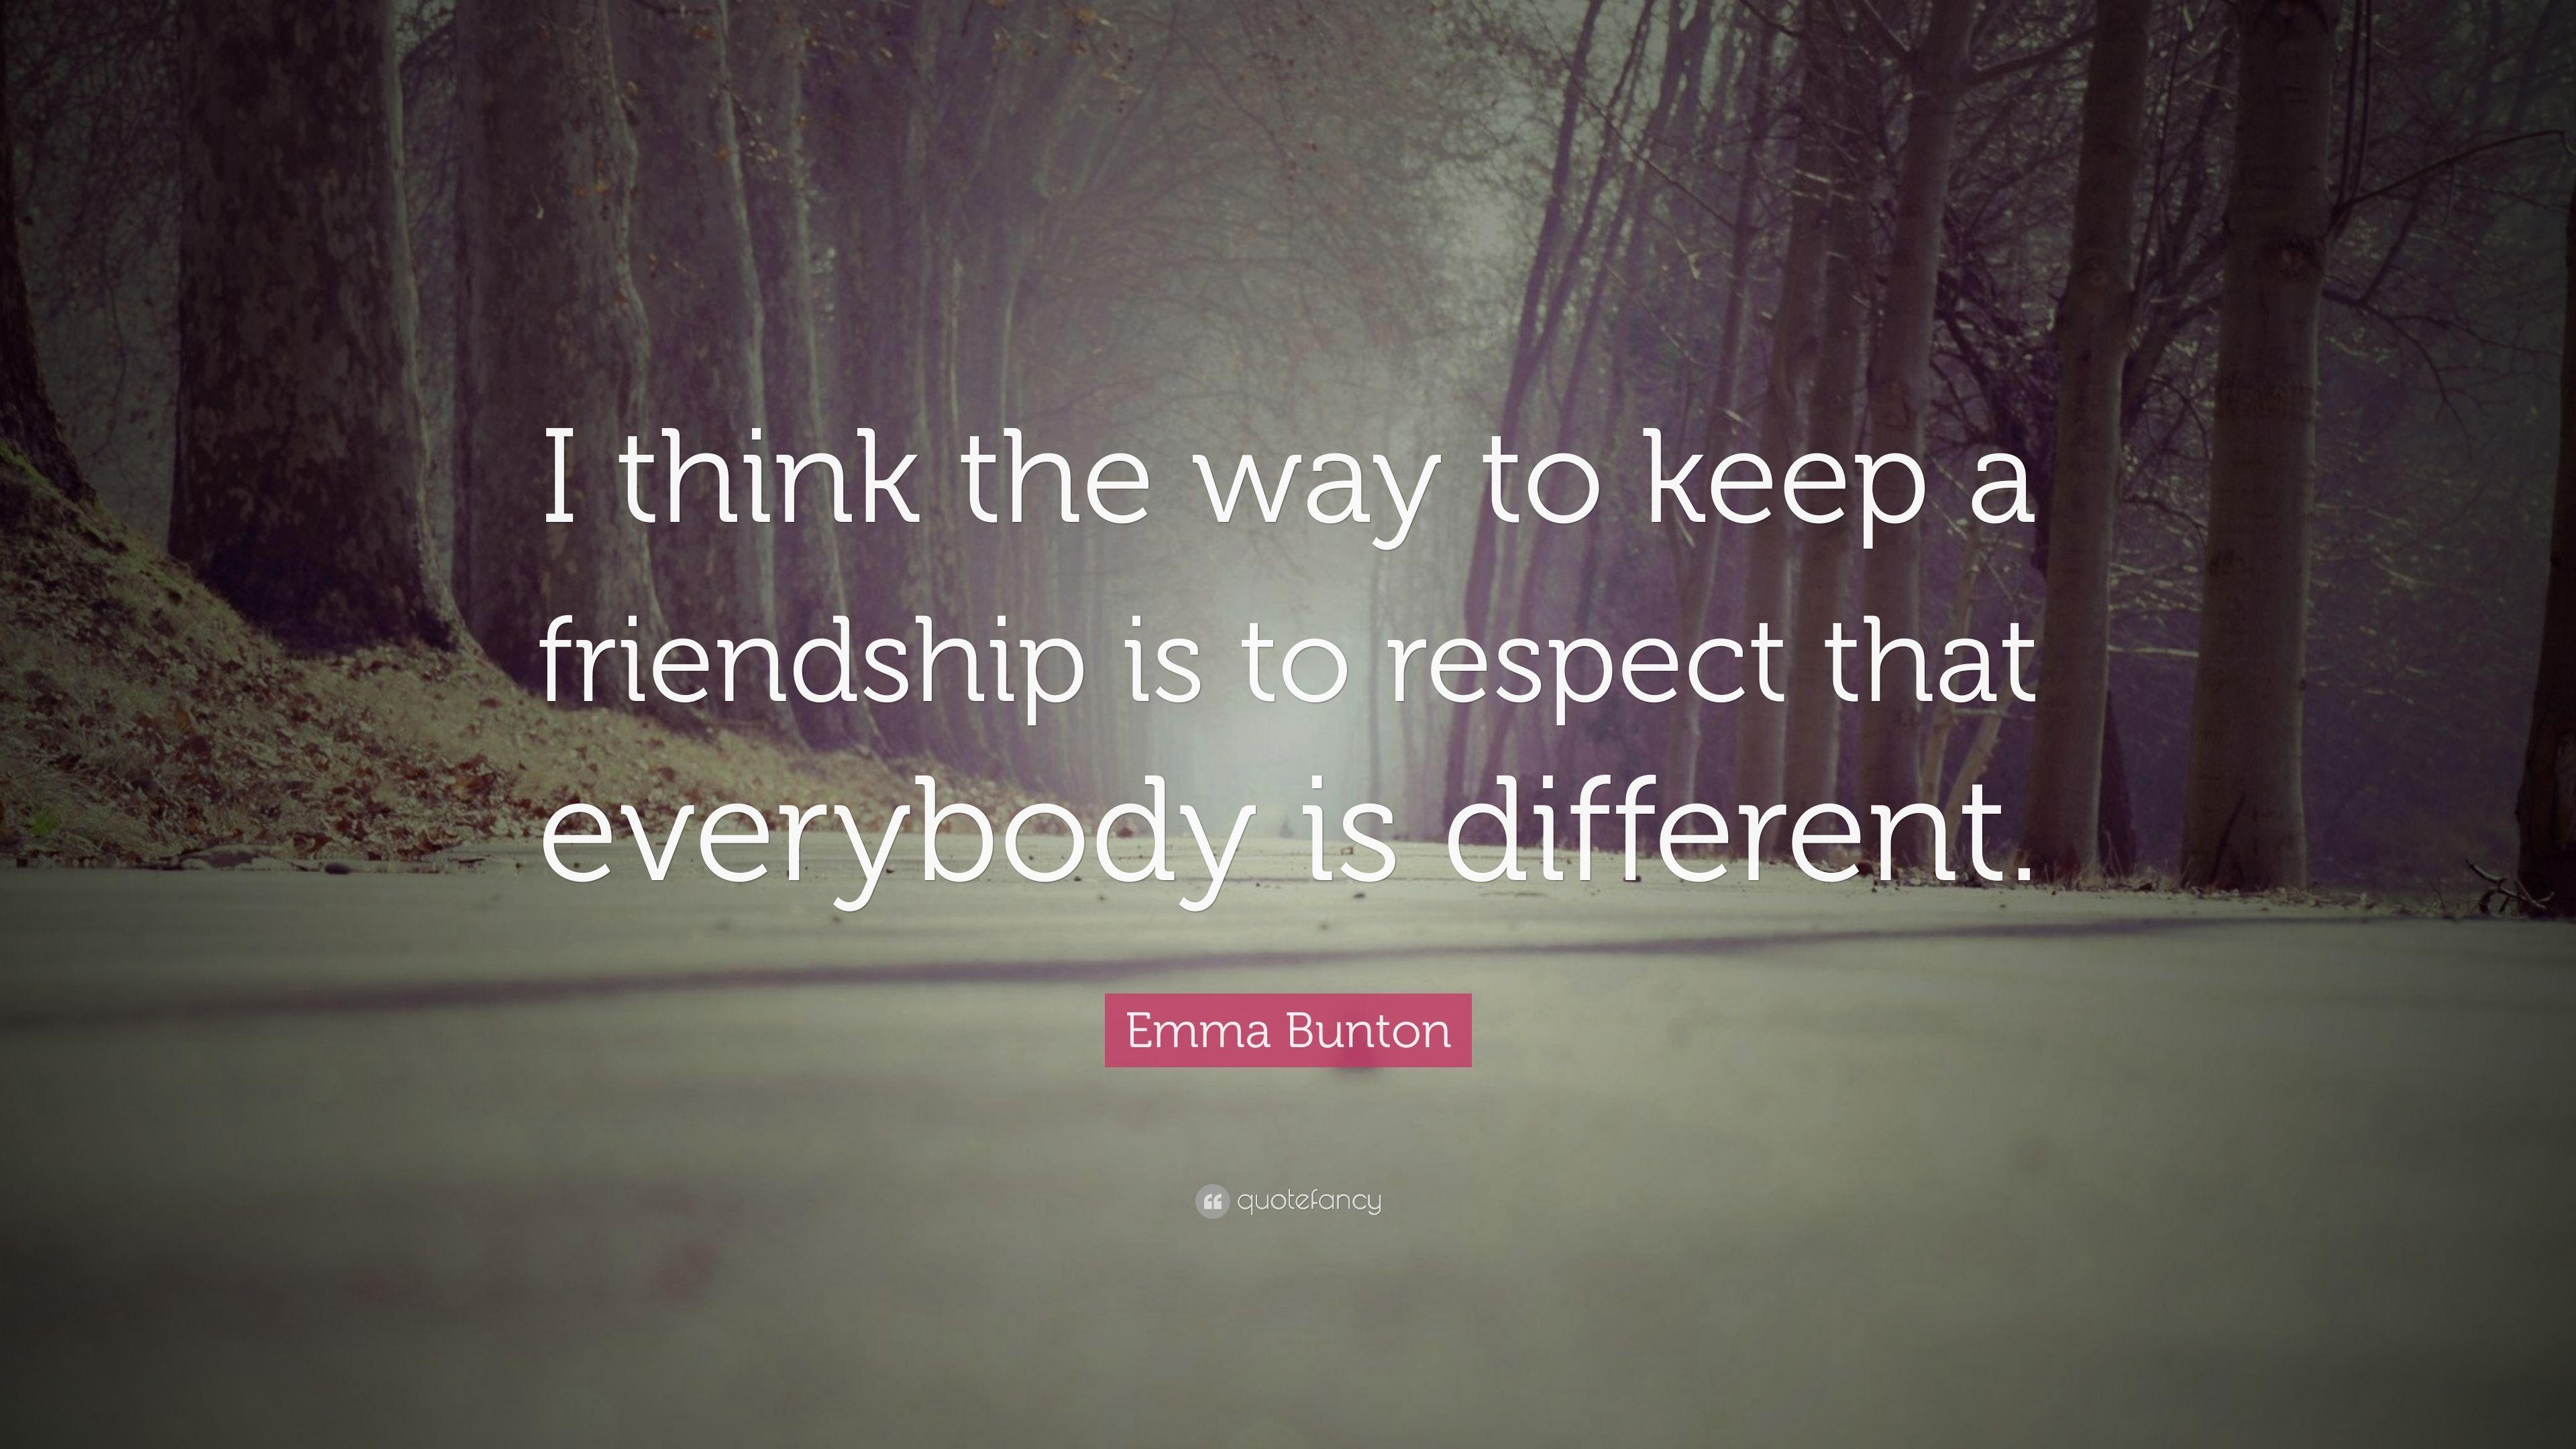 Emma Bunton Quote: "I think the way to keep a friendship is to 